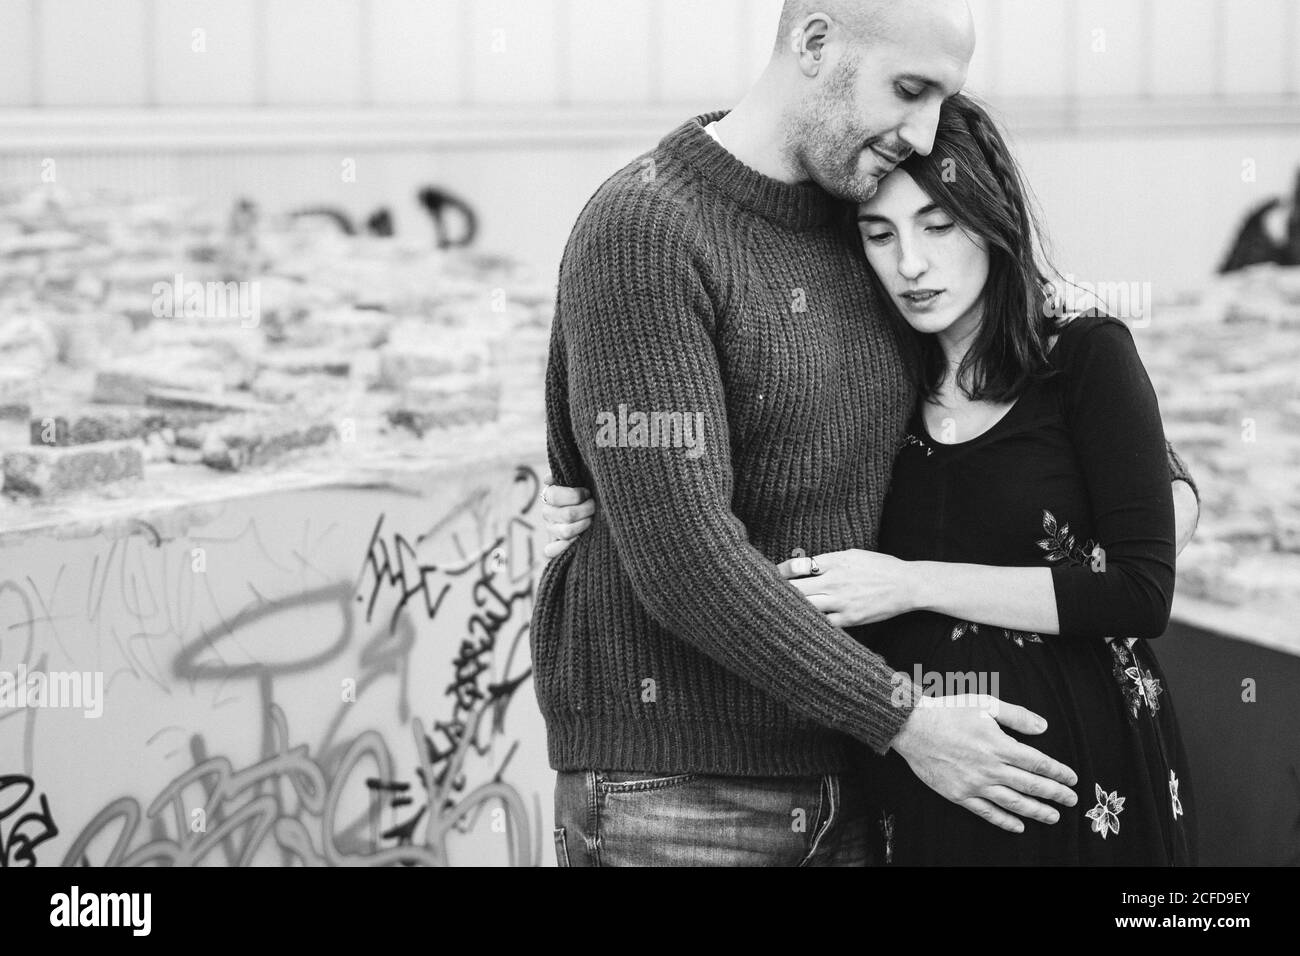 Black and white Side view of bald adult man embracing and kissing pregnant wife while standing on narrow city street together Stock Photo